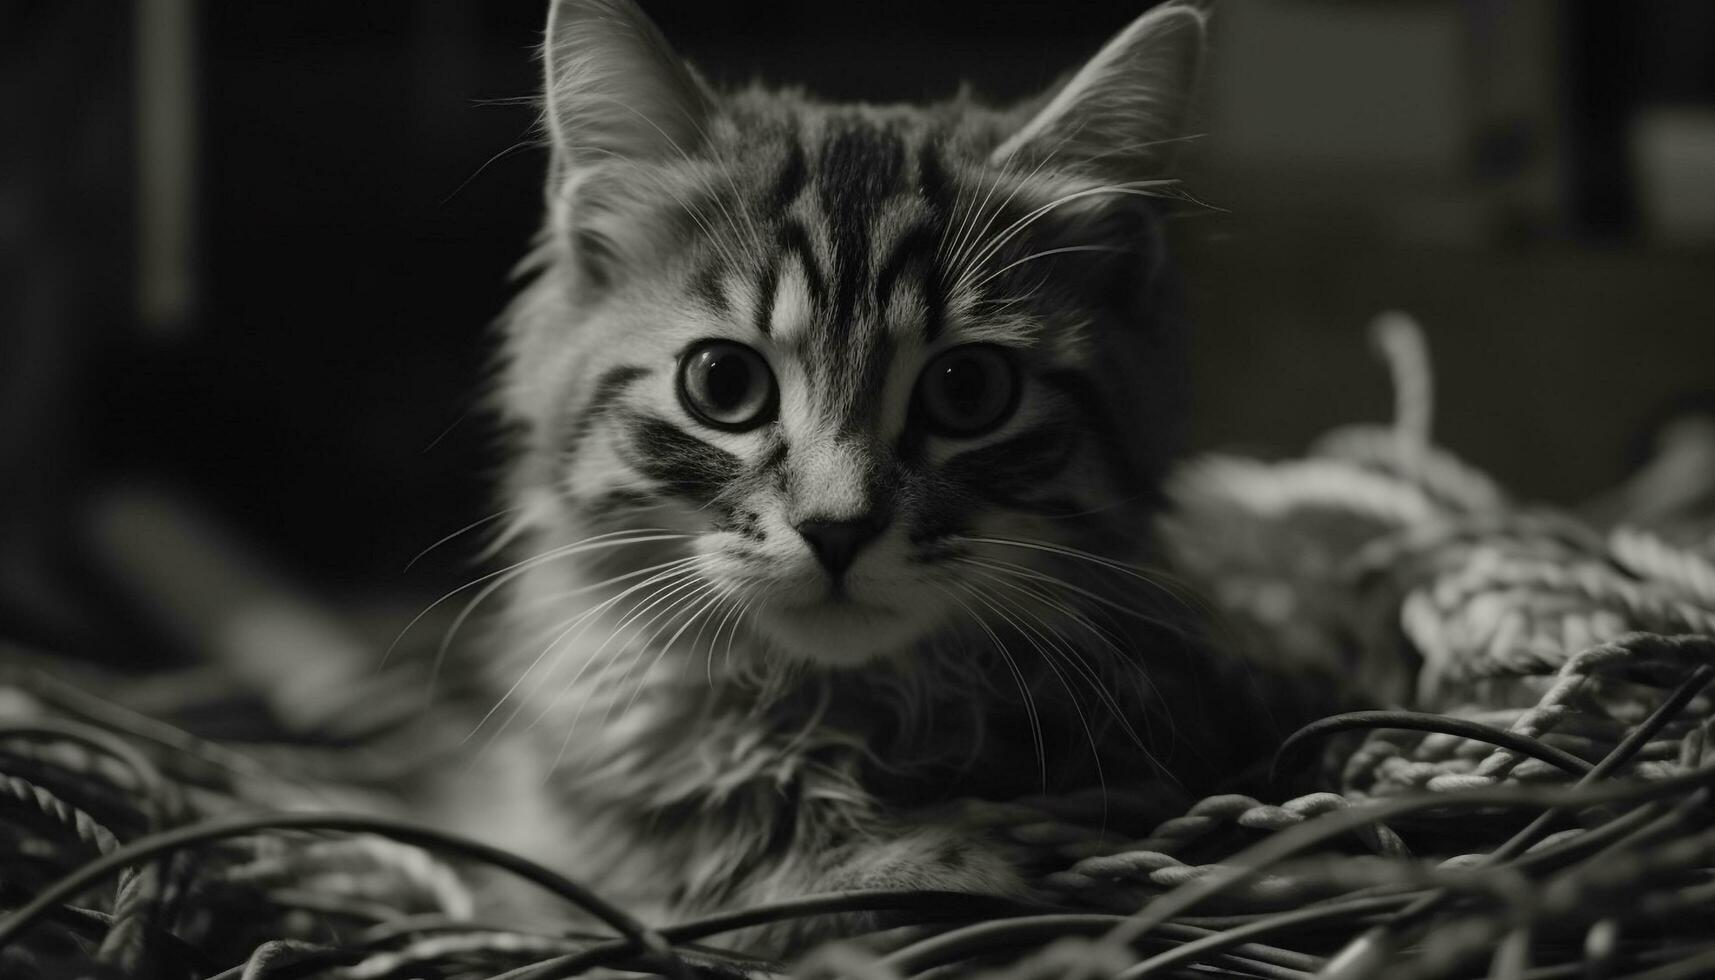 Fluffy kitten staring, close up portrait, black and white monochrome generated by AI photo